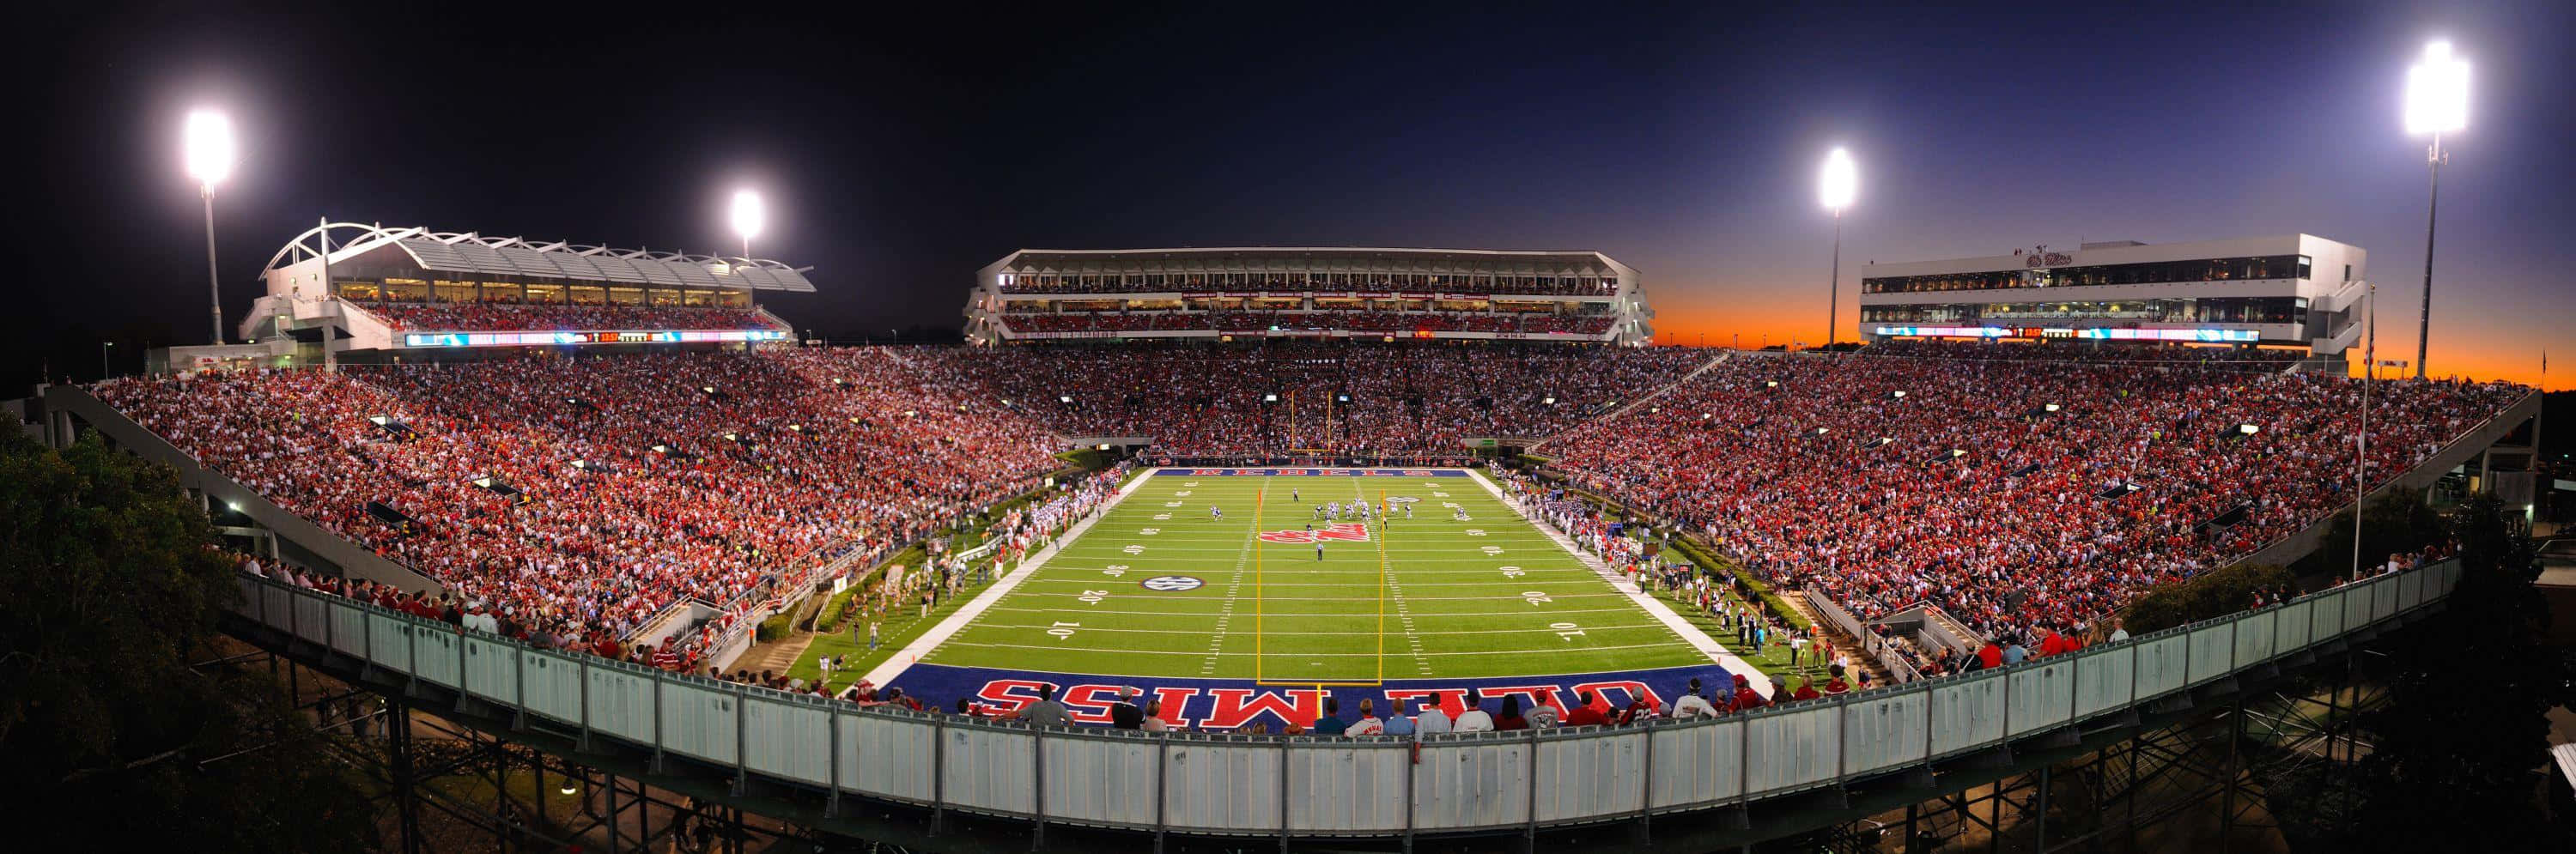 Cheering On The Rebels At The Ole Miss Stadium Wallpaper